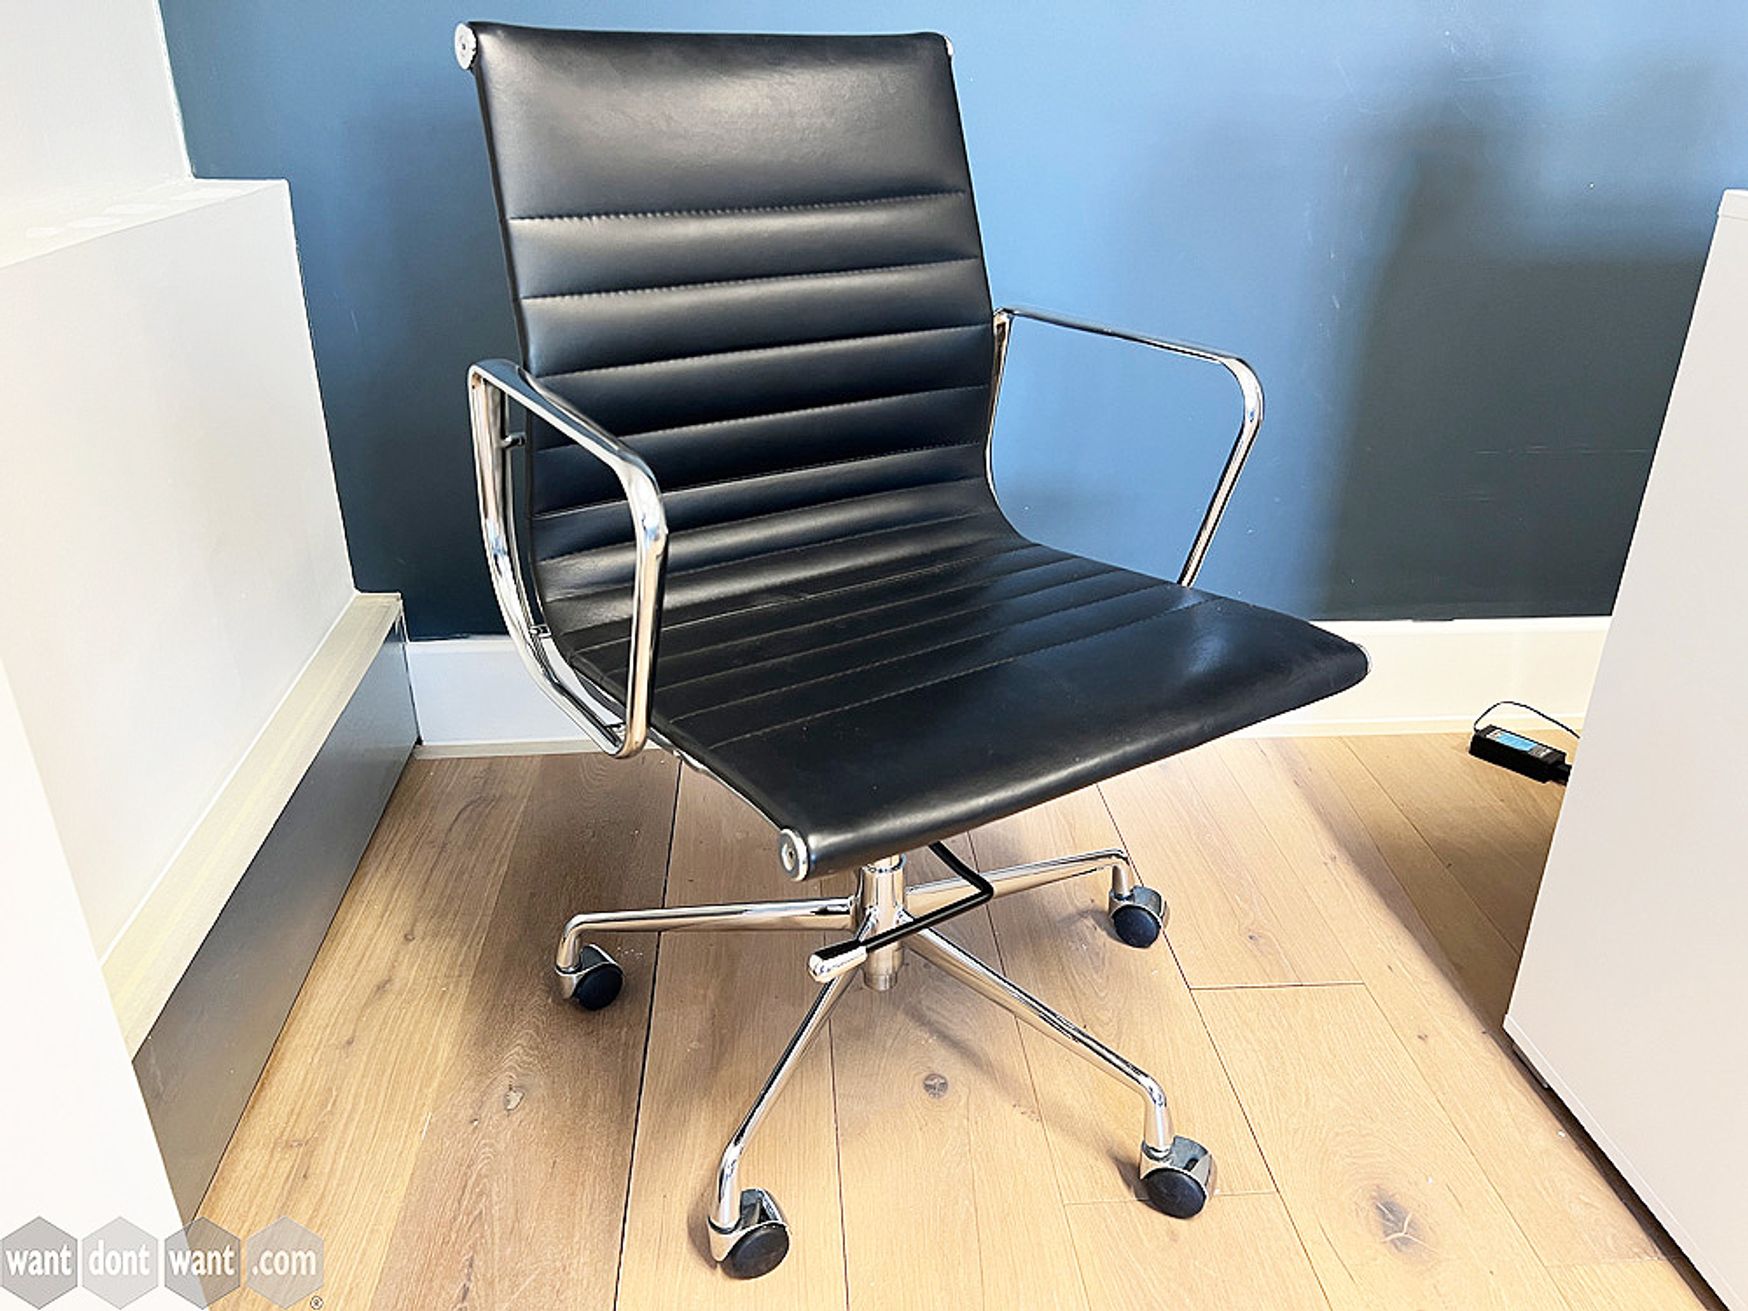 Used Eames style meeting chairs upholstered in black hide with chrome arms and base.